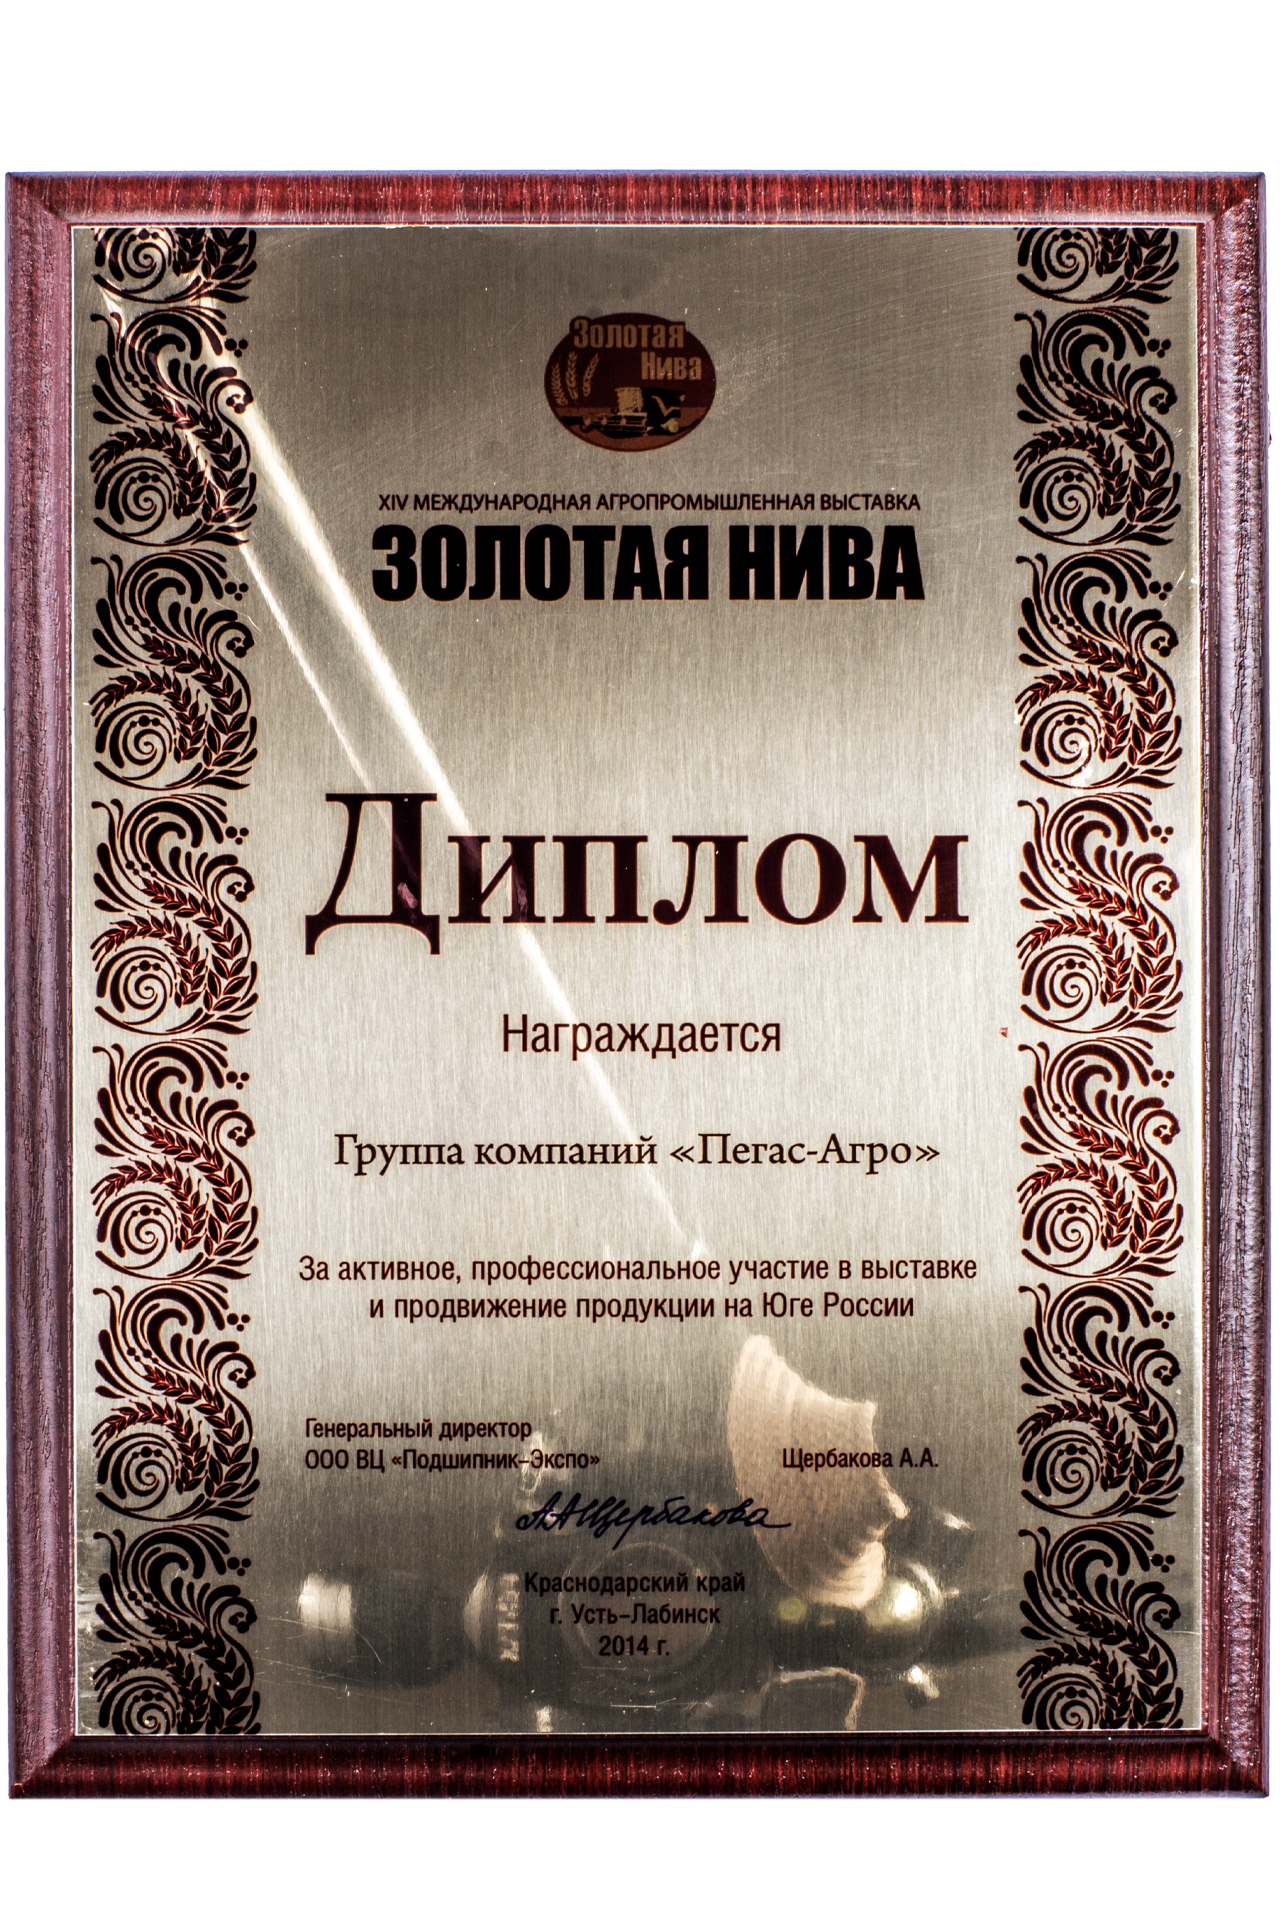 Diploma for Active Participation in the 14th International Agroindustrial Exhibition “Golden Field”, the Krasnodar Territory, Ust-Labinsk